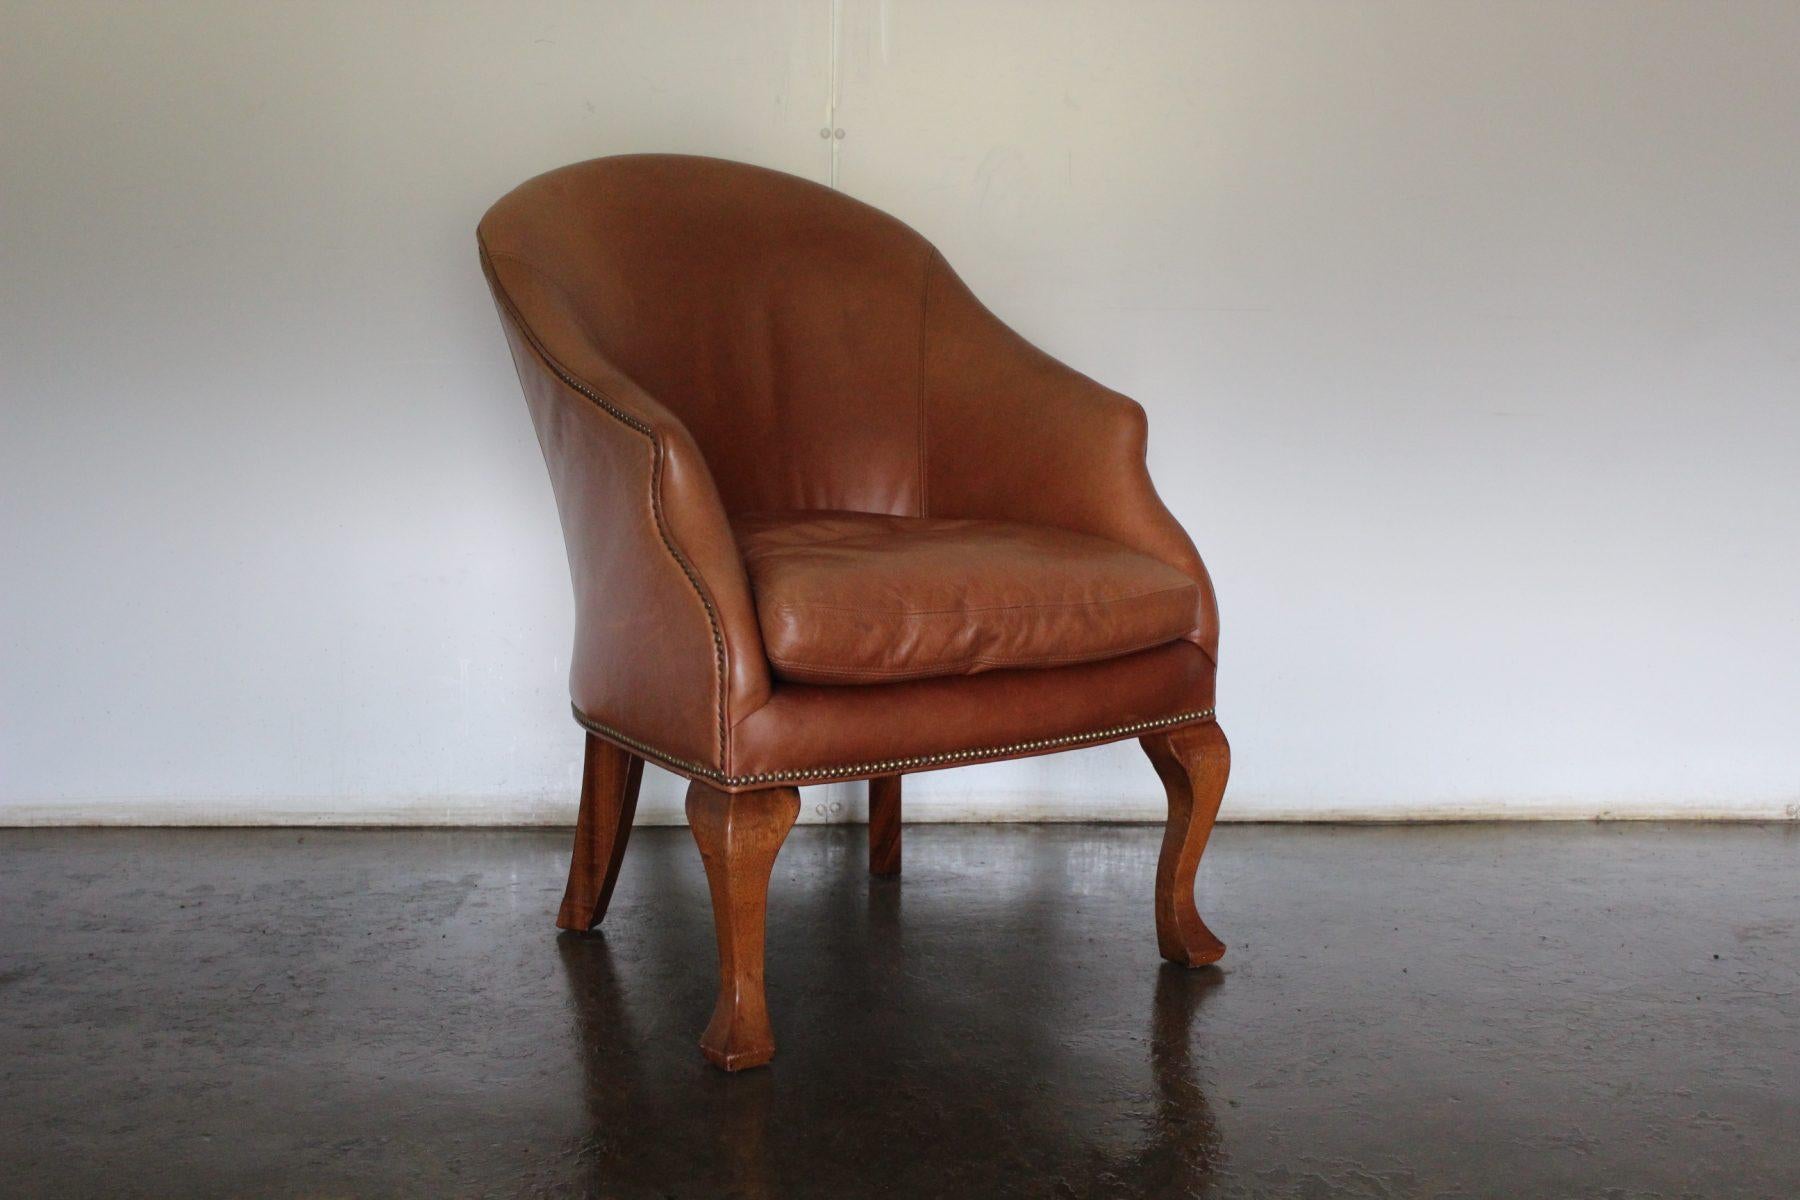 On offer on this occasion is an incredibly rare, and beautifully-presented Ralph Lauren “Beldon” Armchair, dressed in a peerless top-grade Tan-Brown Saddle Leather.

As you will no doubt be aware by your interest in this Ralph Lauren piece, this